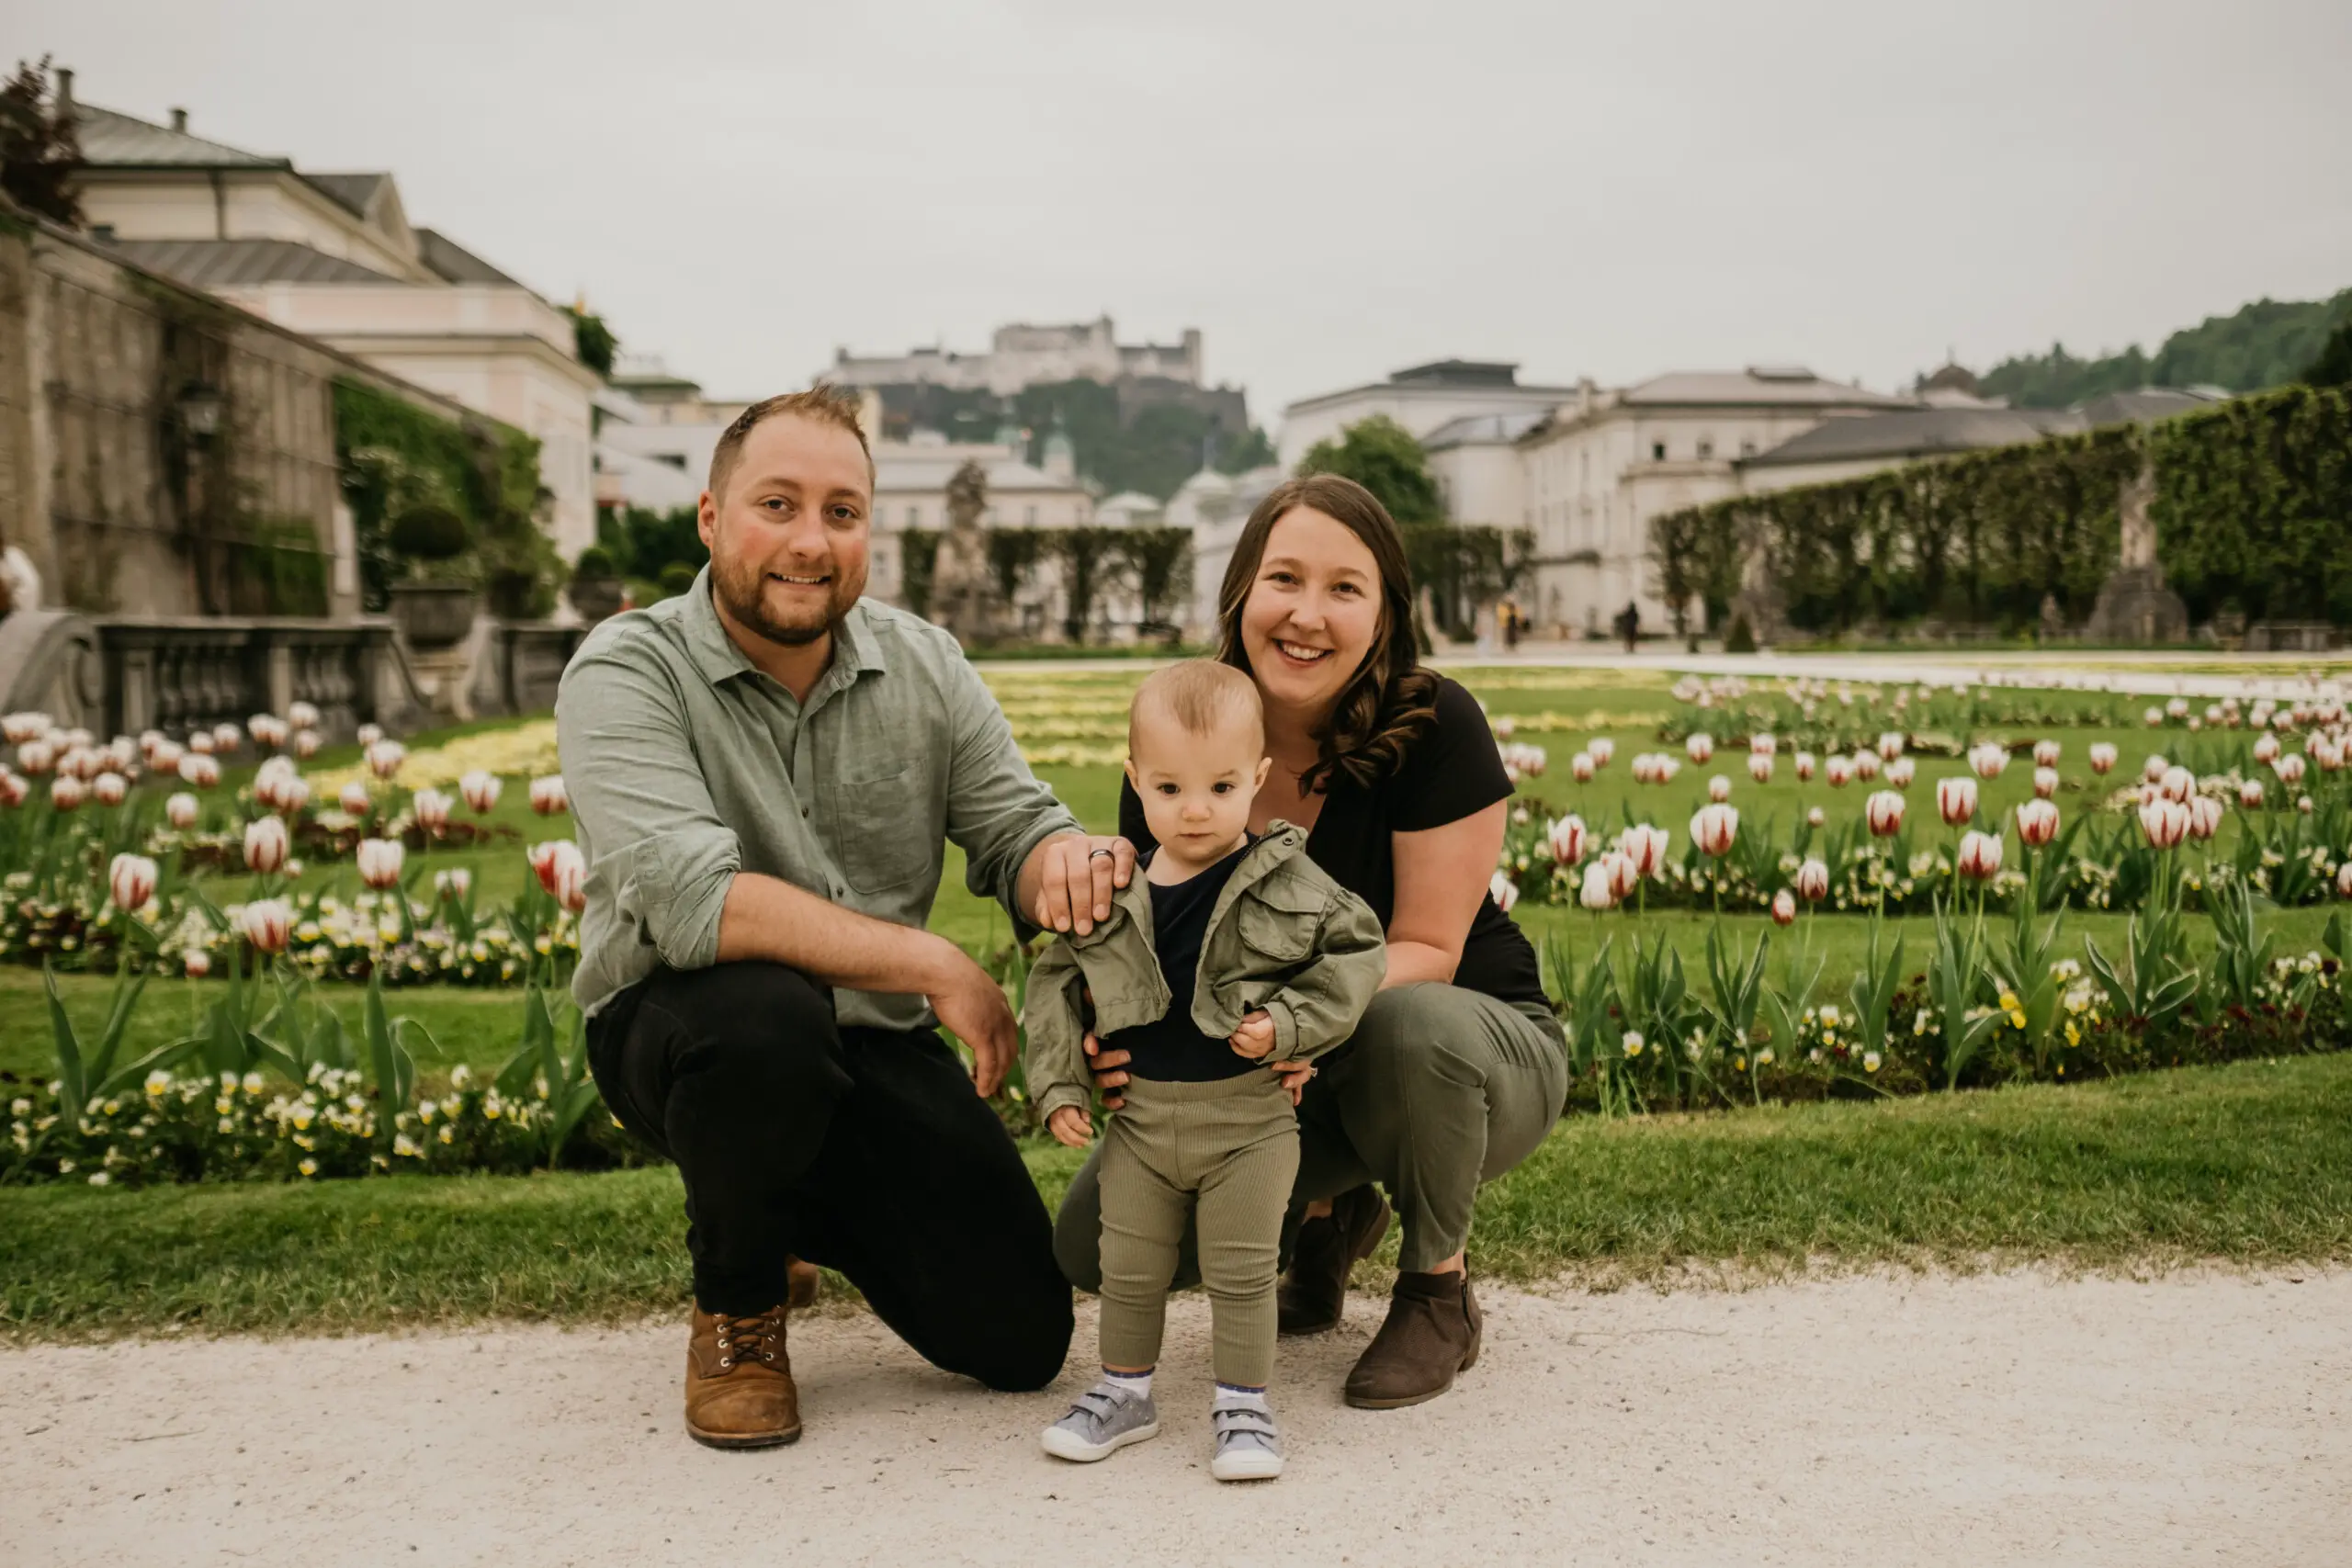 Family photoshoot by Kevin, Localgrapher in Salzburg